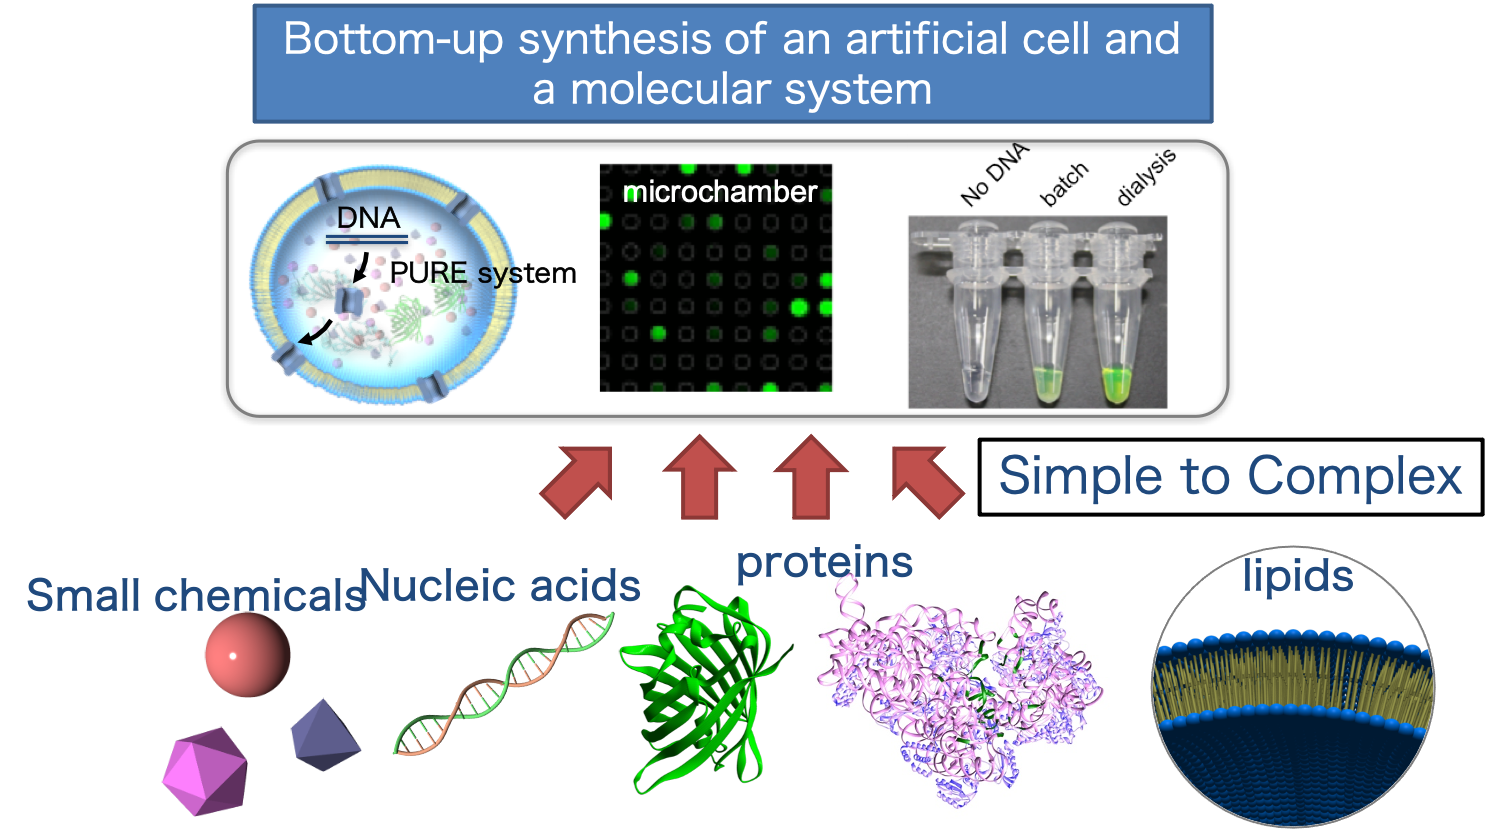 Figure 1：Bottom-up synthesis of artificial cells